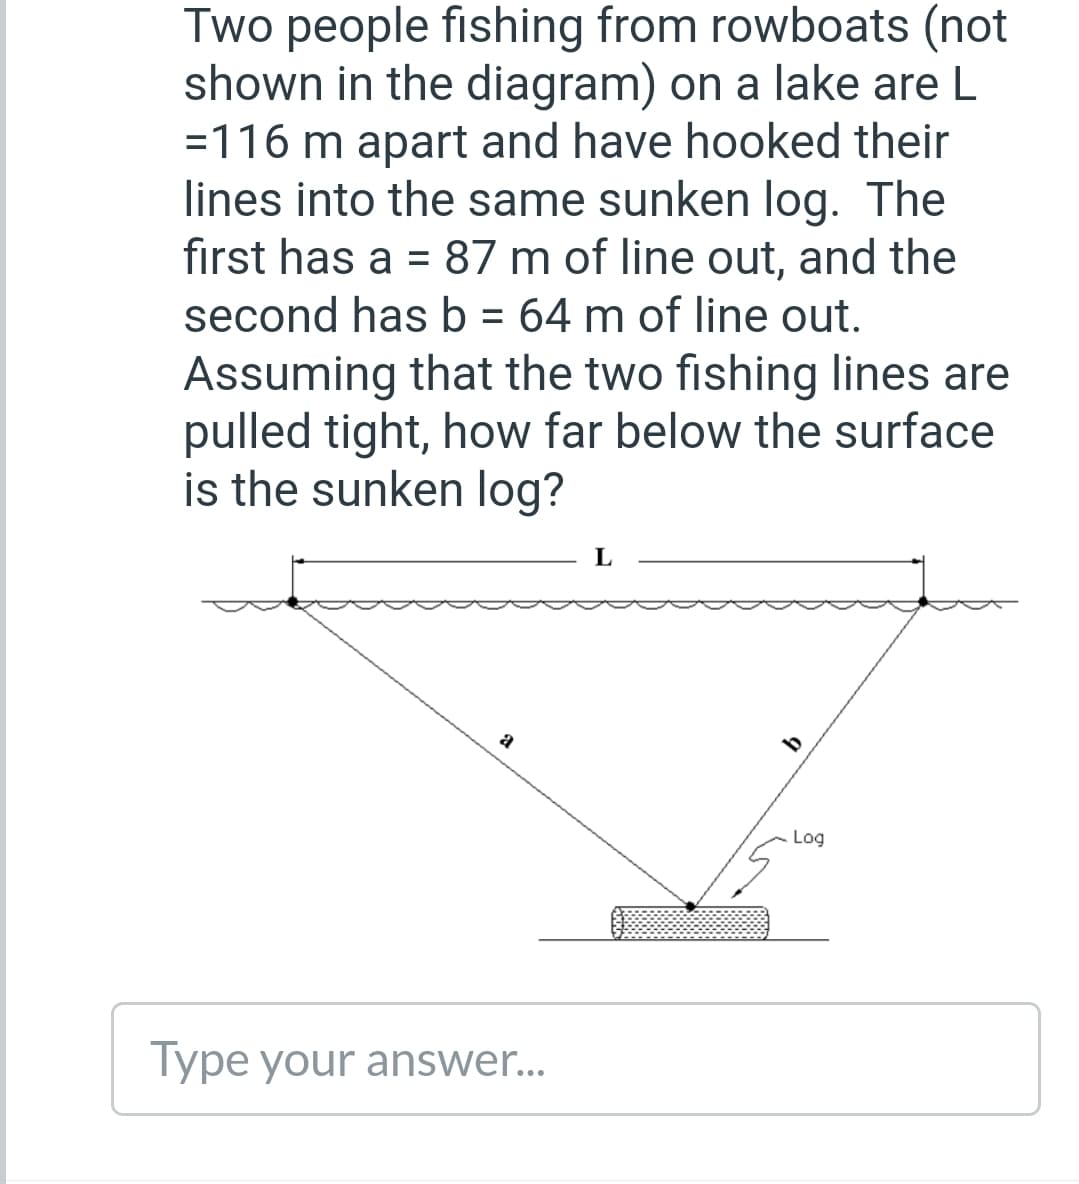 Two people fishing from rowboats (not
shown in the diagram) on a lake are L
=116 m apart and have hooked their
lines into the same sunken log. The
first has a = 87 m of line out, and the
second has b = 64 m of line out.
Assuming that the two fishing lines are
pulled tight, how far below the surface
is the sunken log?
Log
Type your answer...
